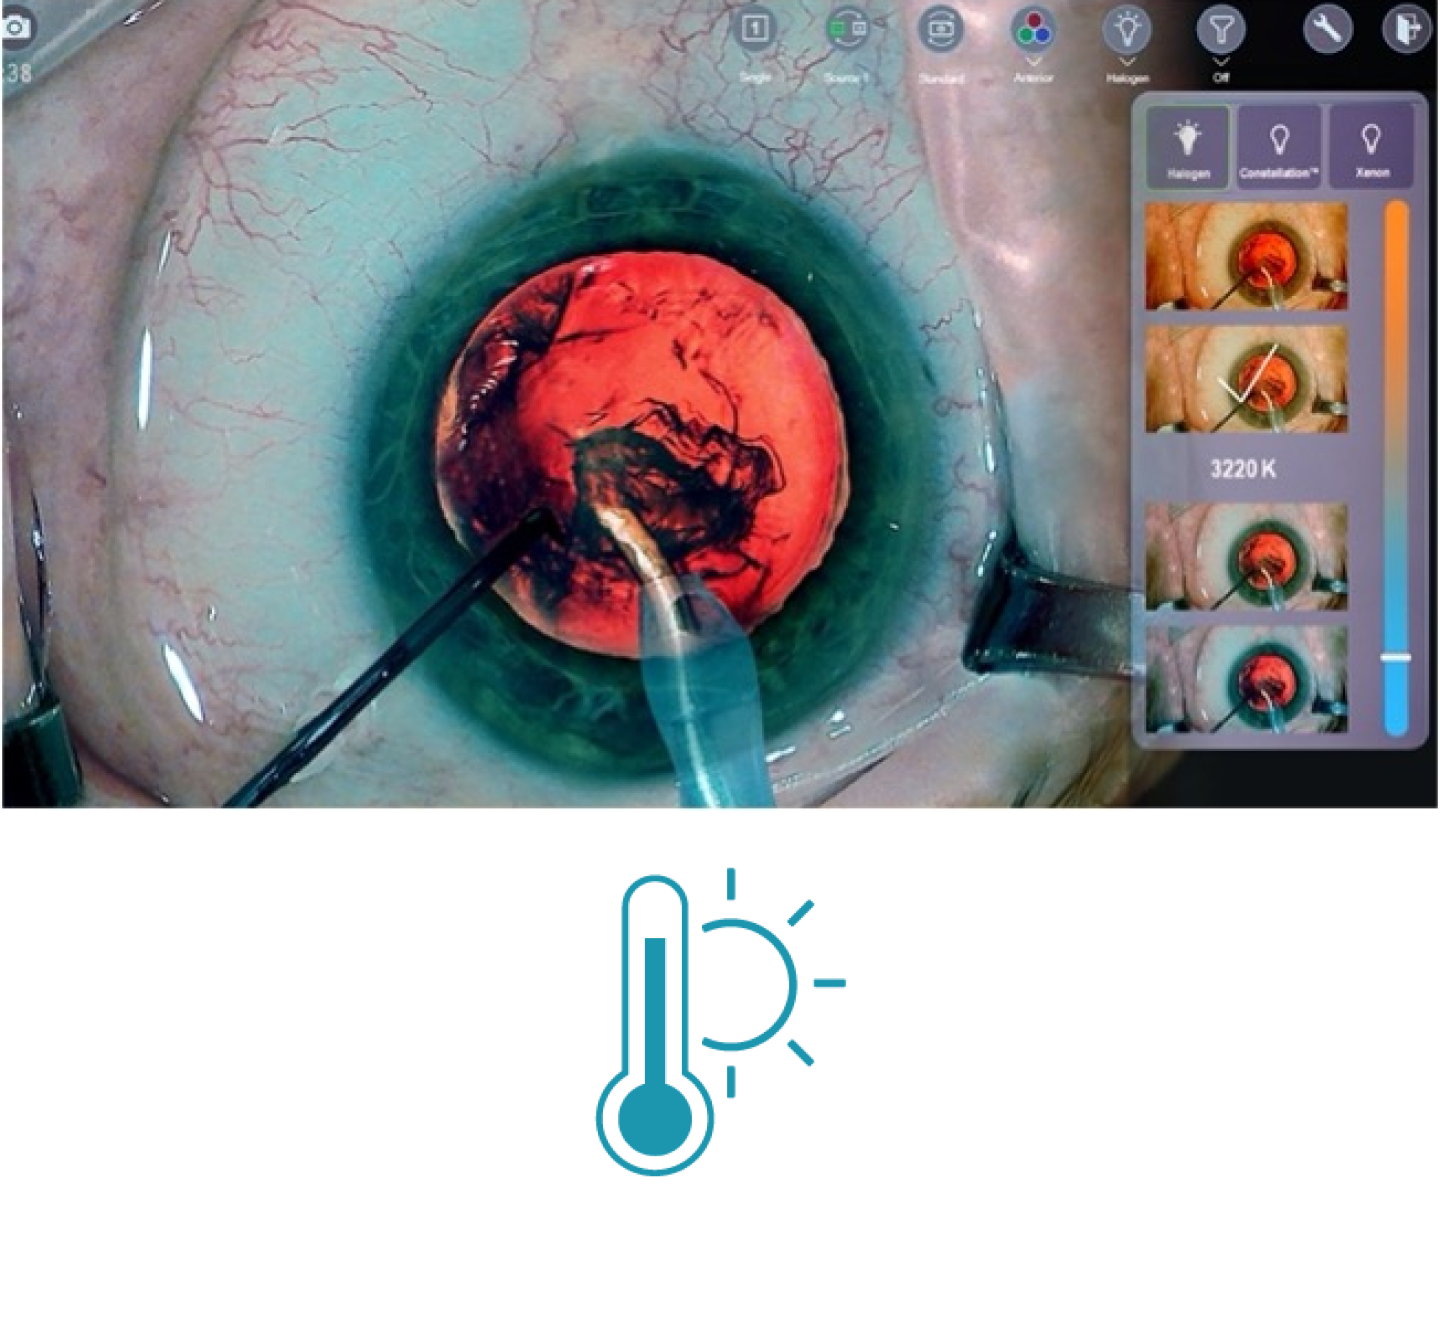 A closeup image of an eye during surgery with surgical tools on screen Thumbnails on the right side of the screen show the different light temperature filters available with NGENUITY 3D Visualization System.